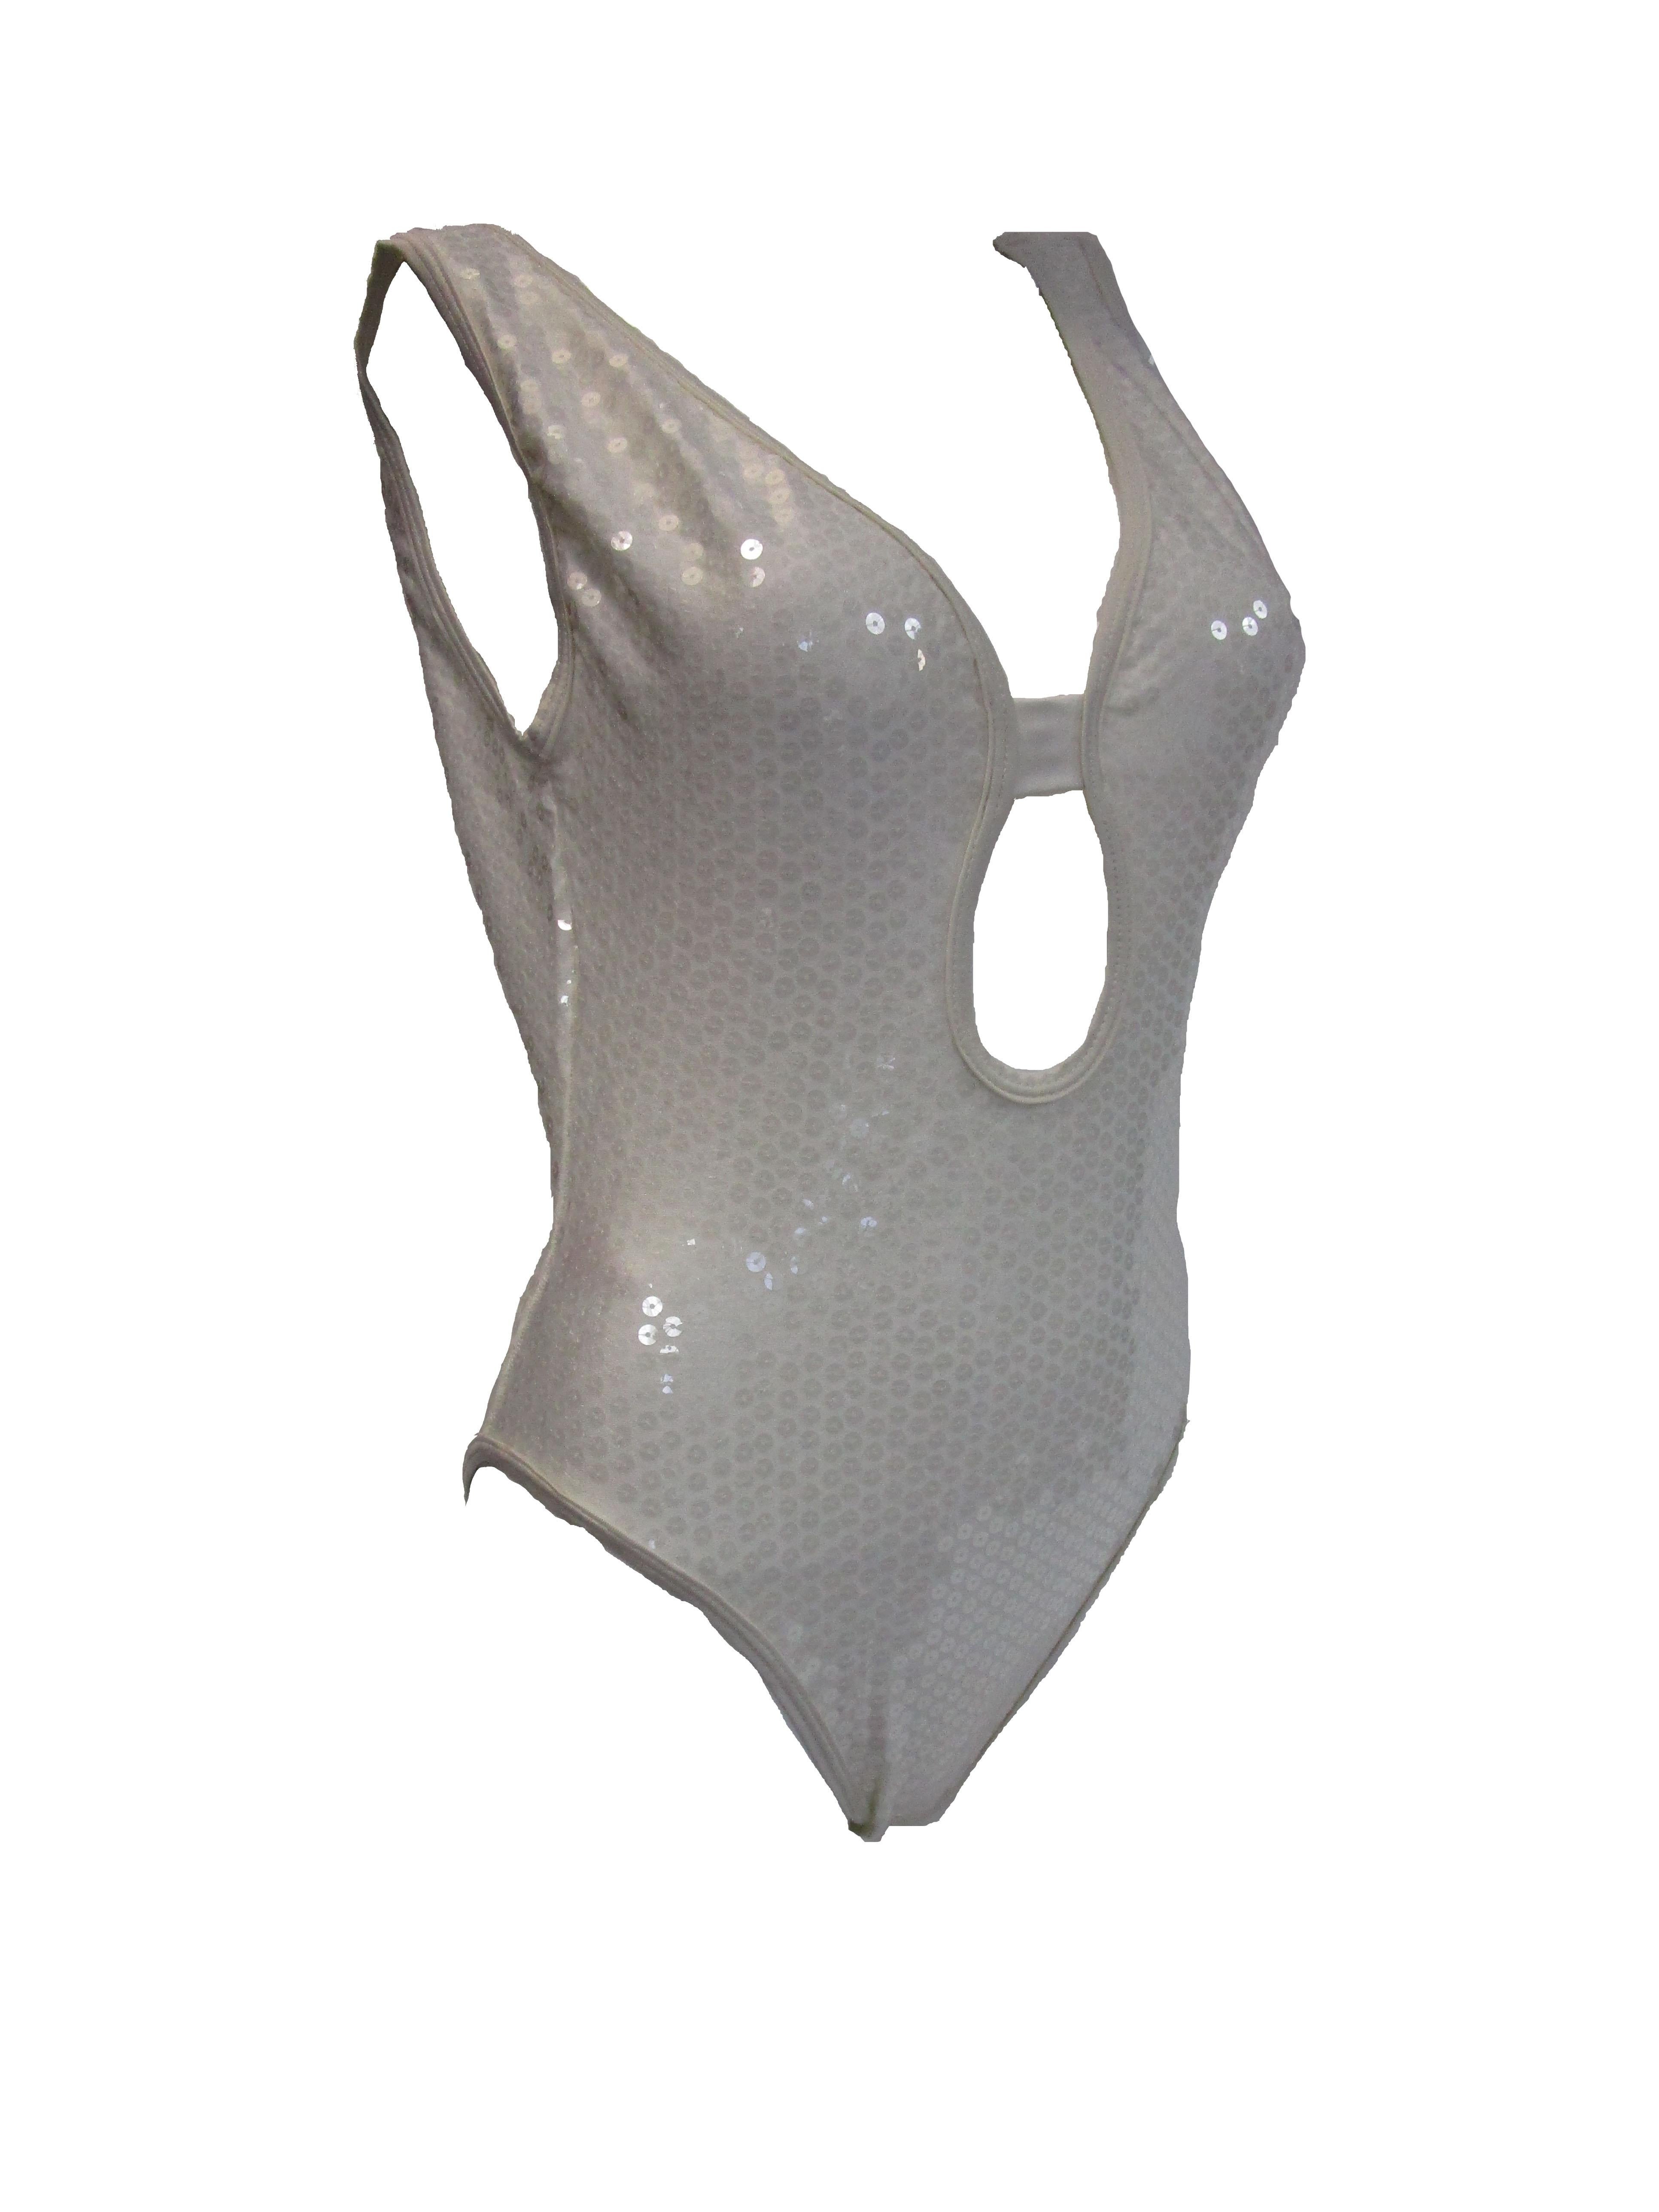 
Steal the spot light with this sparkling one piece bathing suit by Gideon Oberson!
The bathing suit has a scooped back and a skirt that can be worn when you want to cover a bit more!
The sequins throughout are clear and glisten under the summer